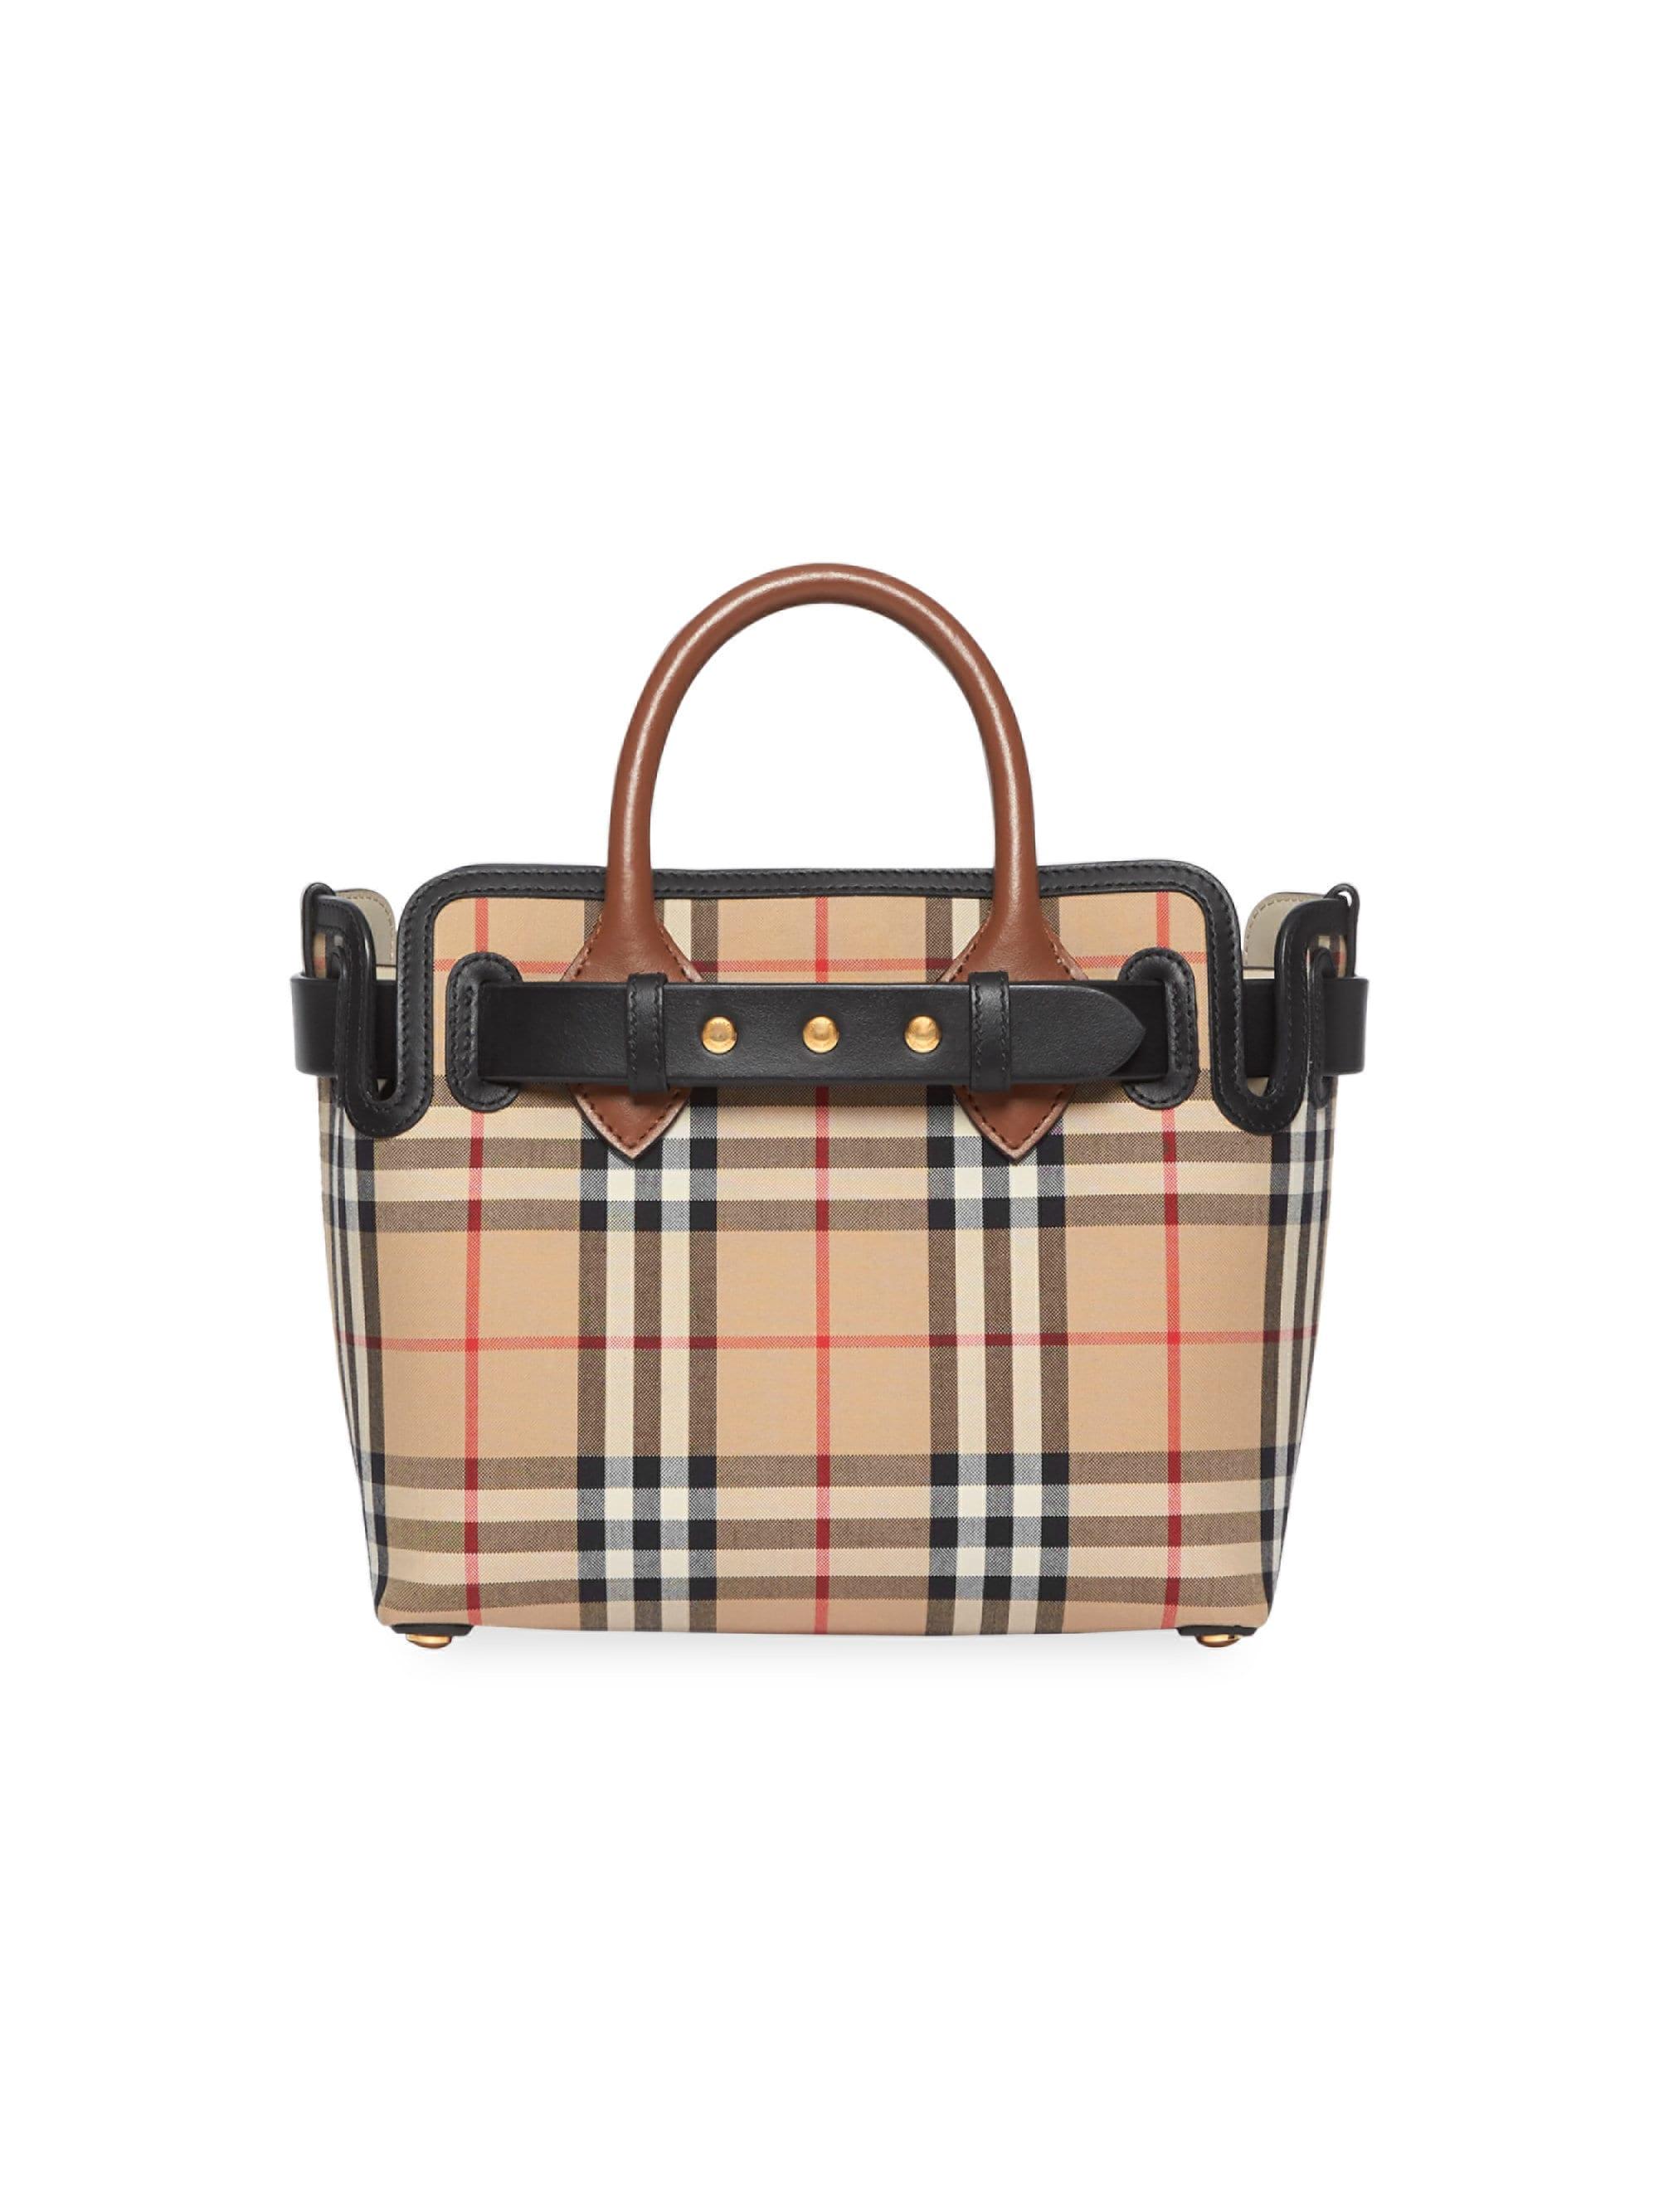 Burberry Vintage Check The Belt Baby Bag in Black | Lyst